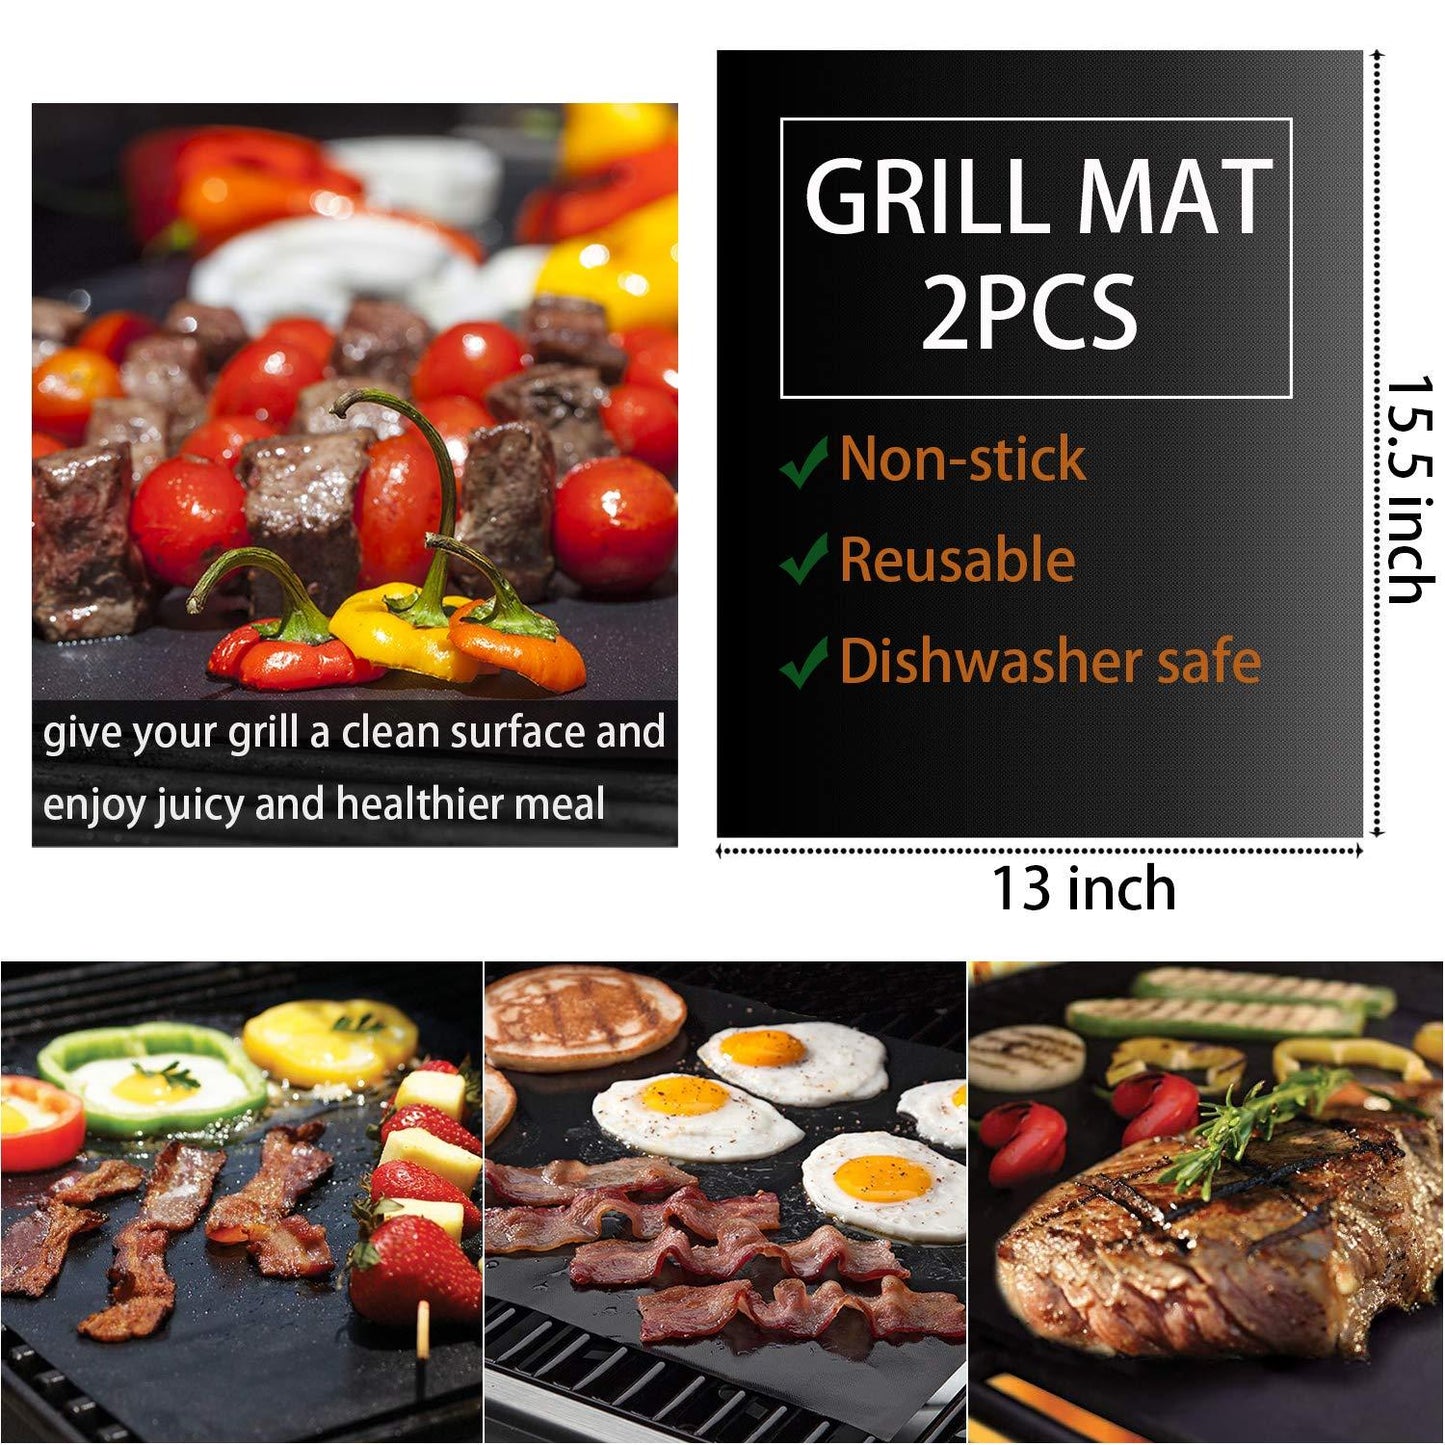 ROMANTICIST 30pcs Stainless Steel Grill Tool Set, Heavy Duty BBQ Grilling Accessories for Men Women, Non-Slip Grill Utensils Kit with Thermometer Mats in Aluminum Case for Outdoor, Camping Silver - CookCave